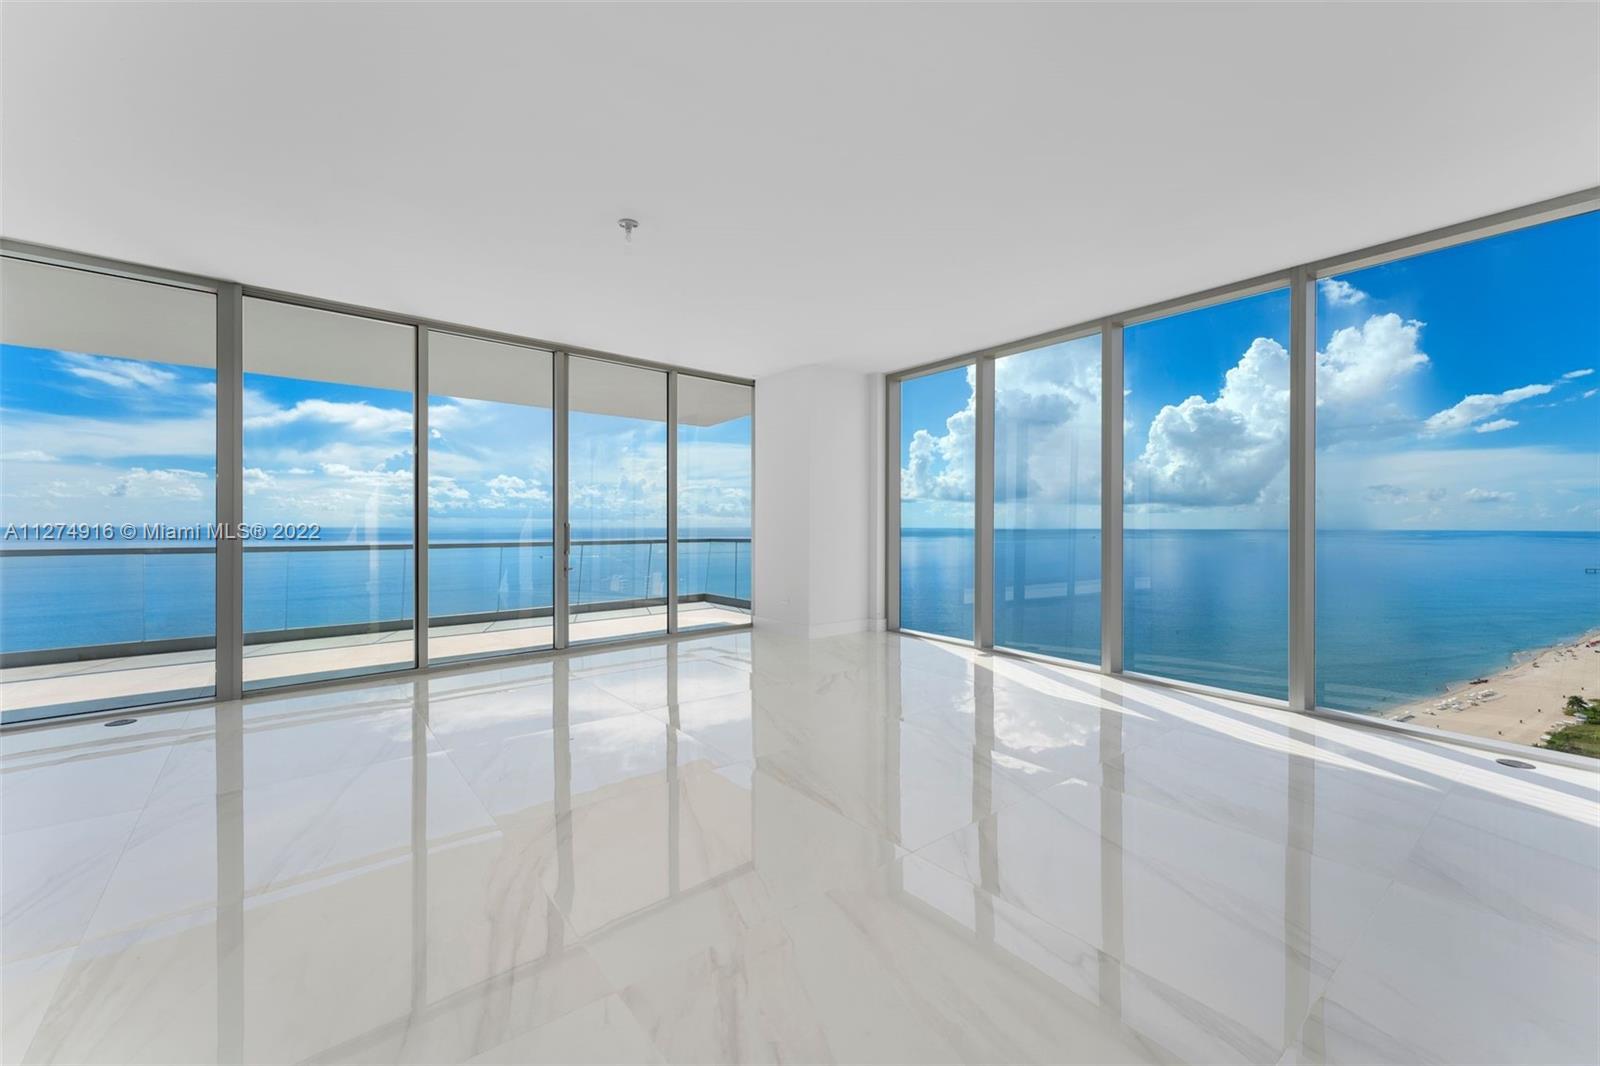 Welcome to Turnberry Ocean Club, a stunning oceanfront condominium tower located on a stretch of pri